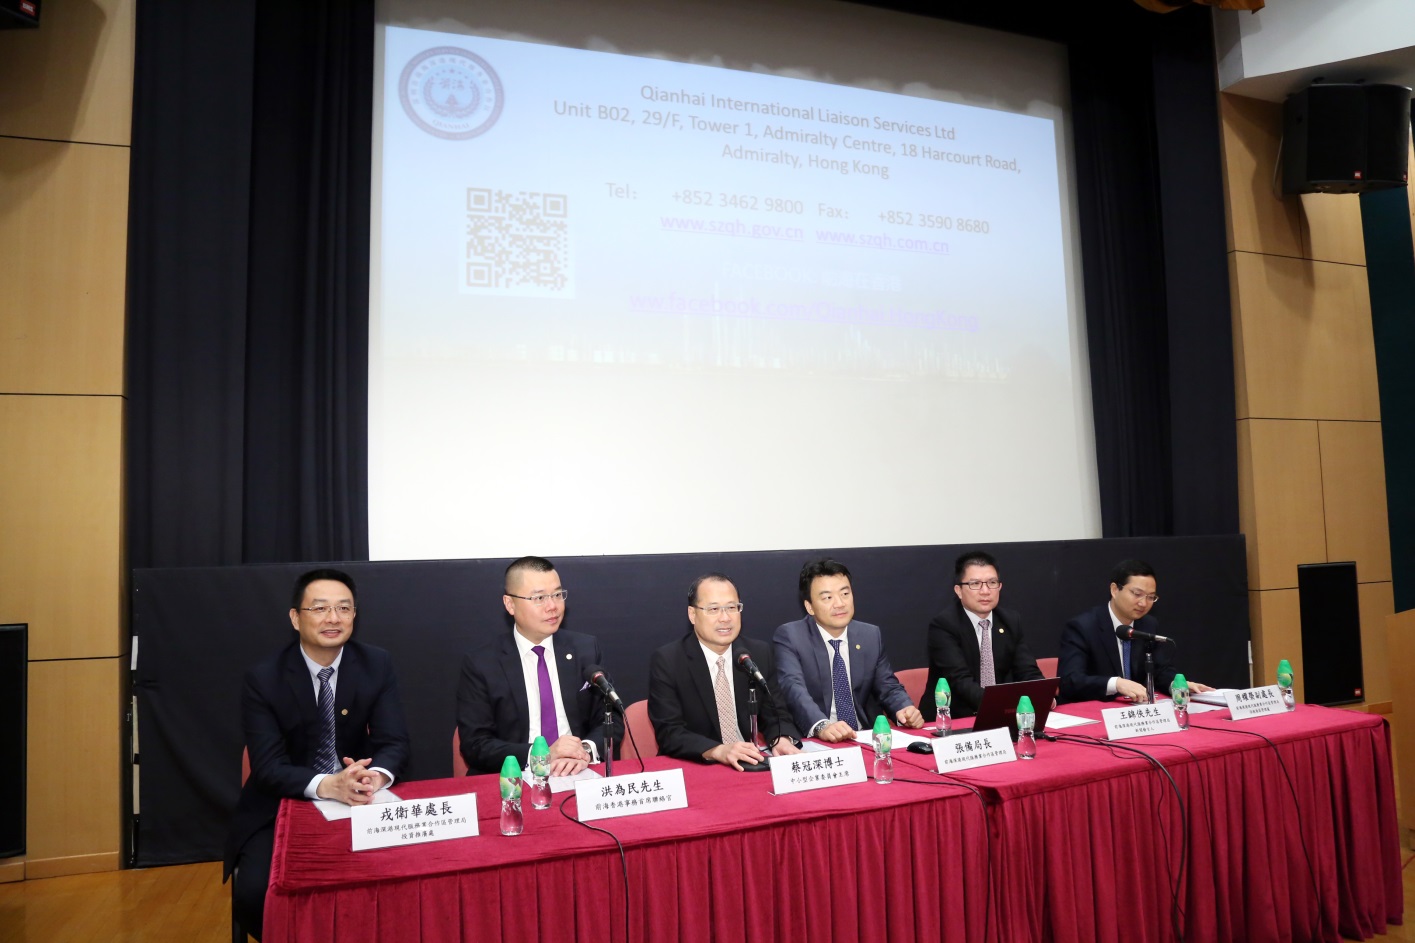 Photo 11 : The Small and Medium Enterprises Committee (SMEC) conducted the "Hong Kong – Qianhai Seminar on the Opportunities to Hong Kong Small and Medium Enterprises brought by the Development of Qianhai" on 28 April 2015.  At the Seminar, the Director-General of the Authority of Qianhai Shenzhen-Hong Kong Modern Service Industry Cooperation Zone of Shenzhen, Mr. Zhang Bei, and other representatives introduced the investment policies and preferential treatment of Qianhai, things to note for investing in Qianhai, as well as the Qianhai Shenzhen-Hong Kong Youth Innovation and Entrepreneur Hub, to over 100 representatives from around 40 local SME organisations, major business associations, trade and industrial organisations and professional bodies.